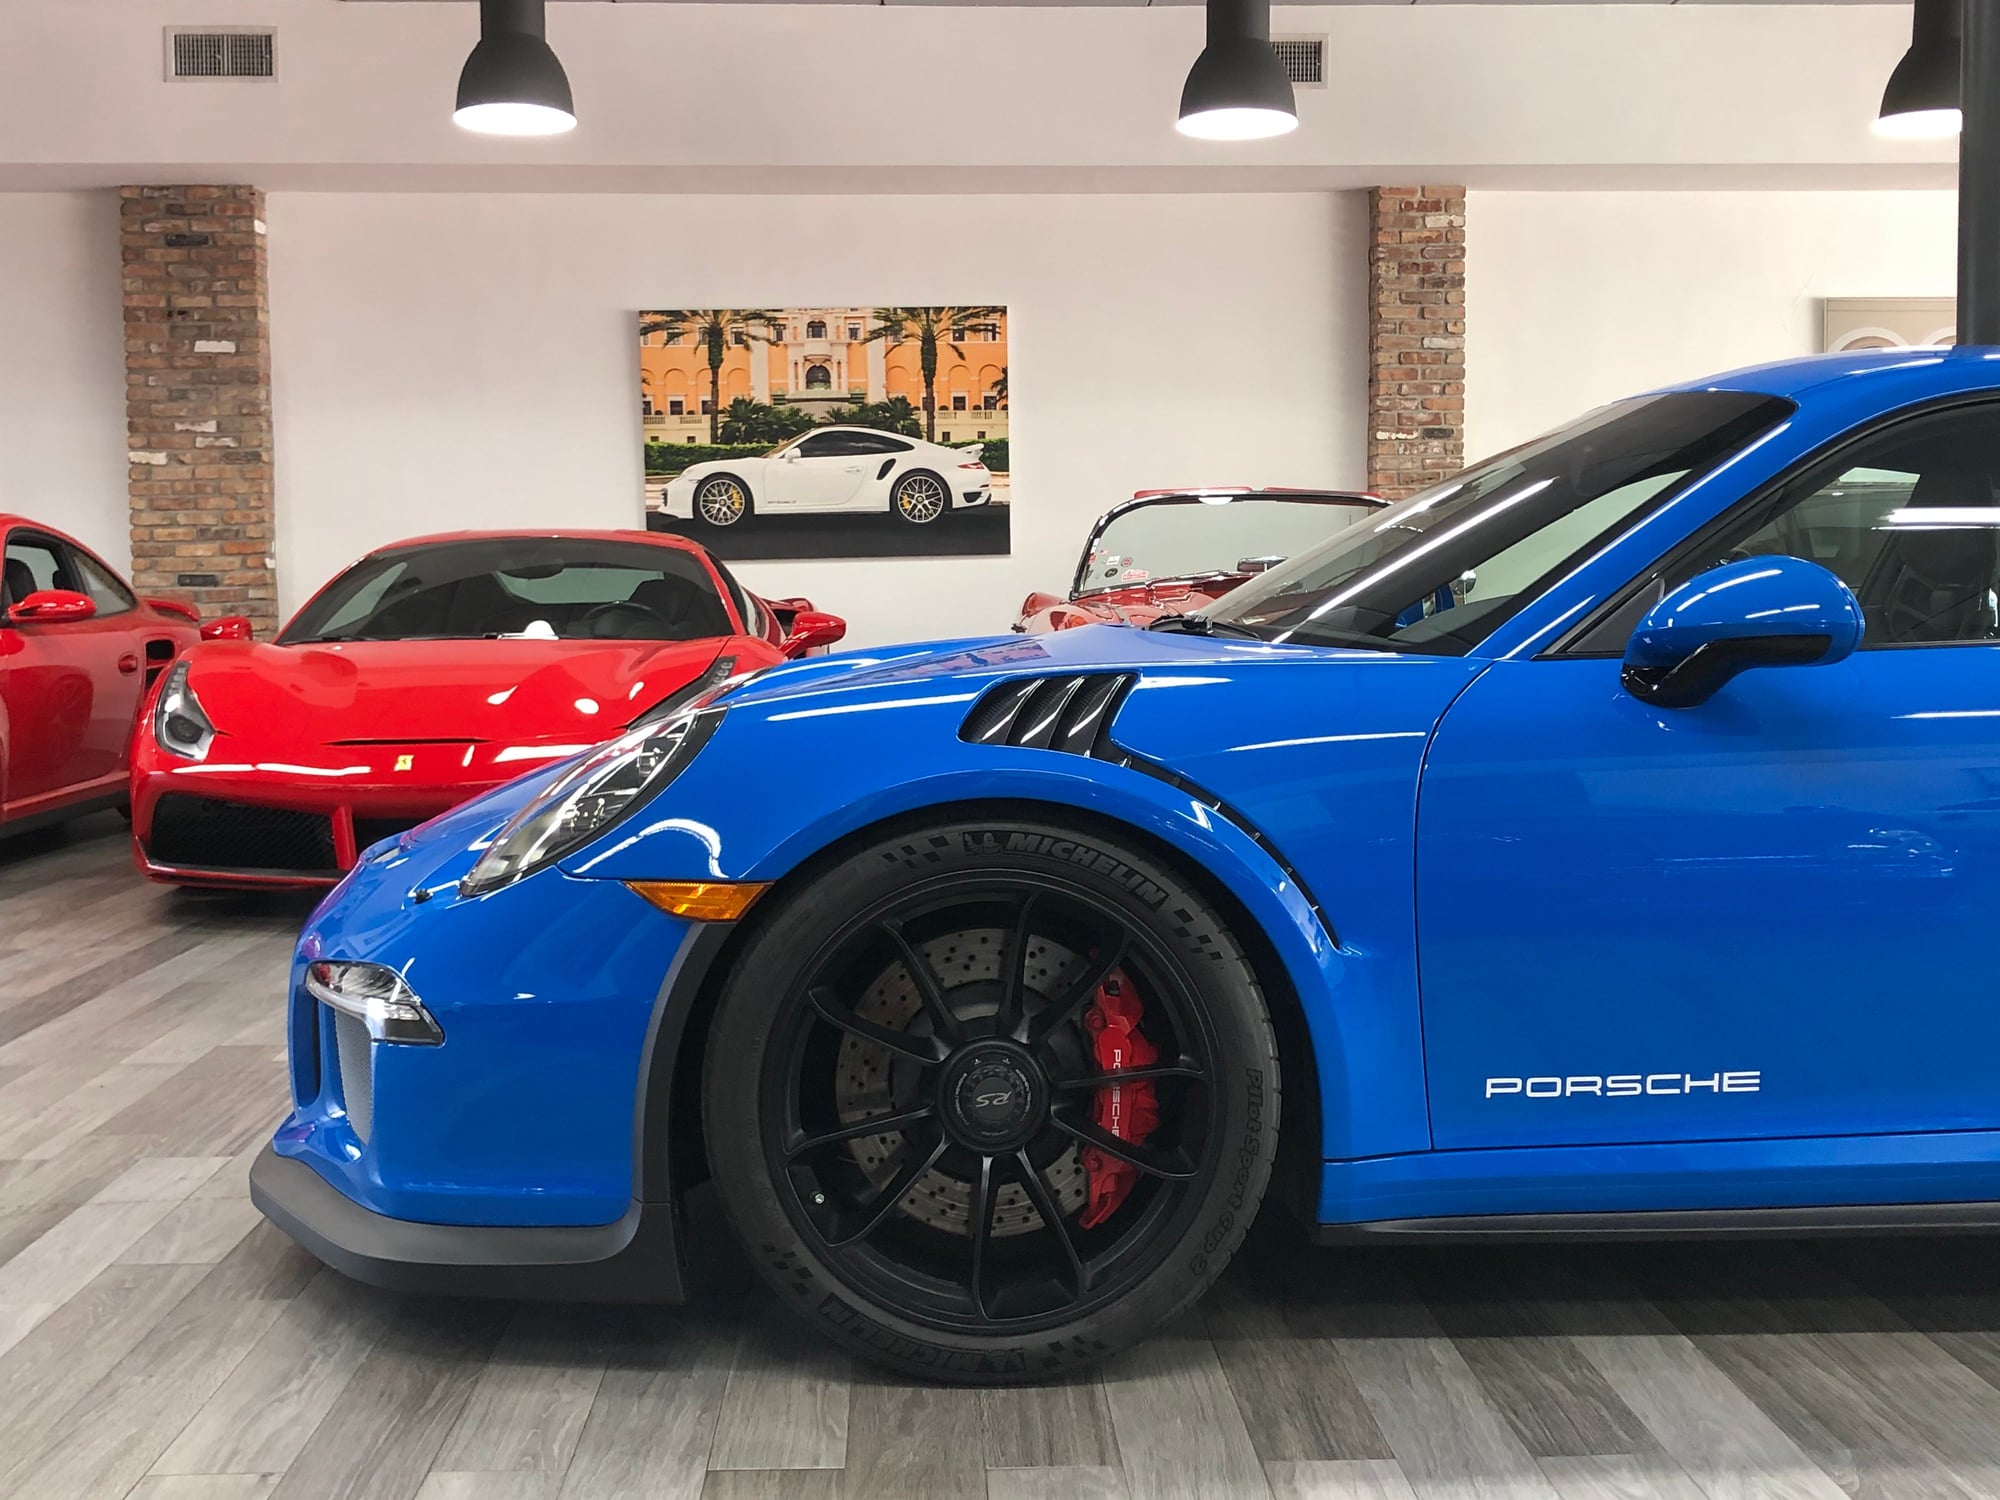 2016 Porsche GT3 - 2016 PORSCHE 911 GT3 RS Voodoo Blue - Used - VIN WP0AF2A95GS192588 - 1,239 Miles - 6 cyl - 2WD - Automatic - Coupe - Blue - Miami, FL 33146, United States